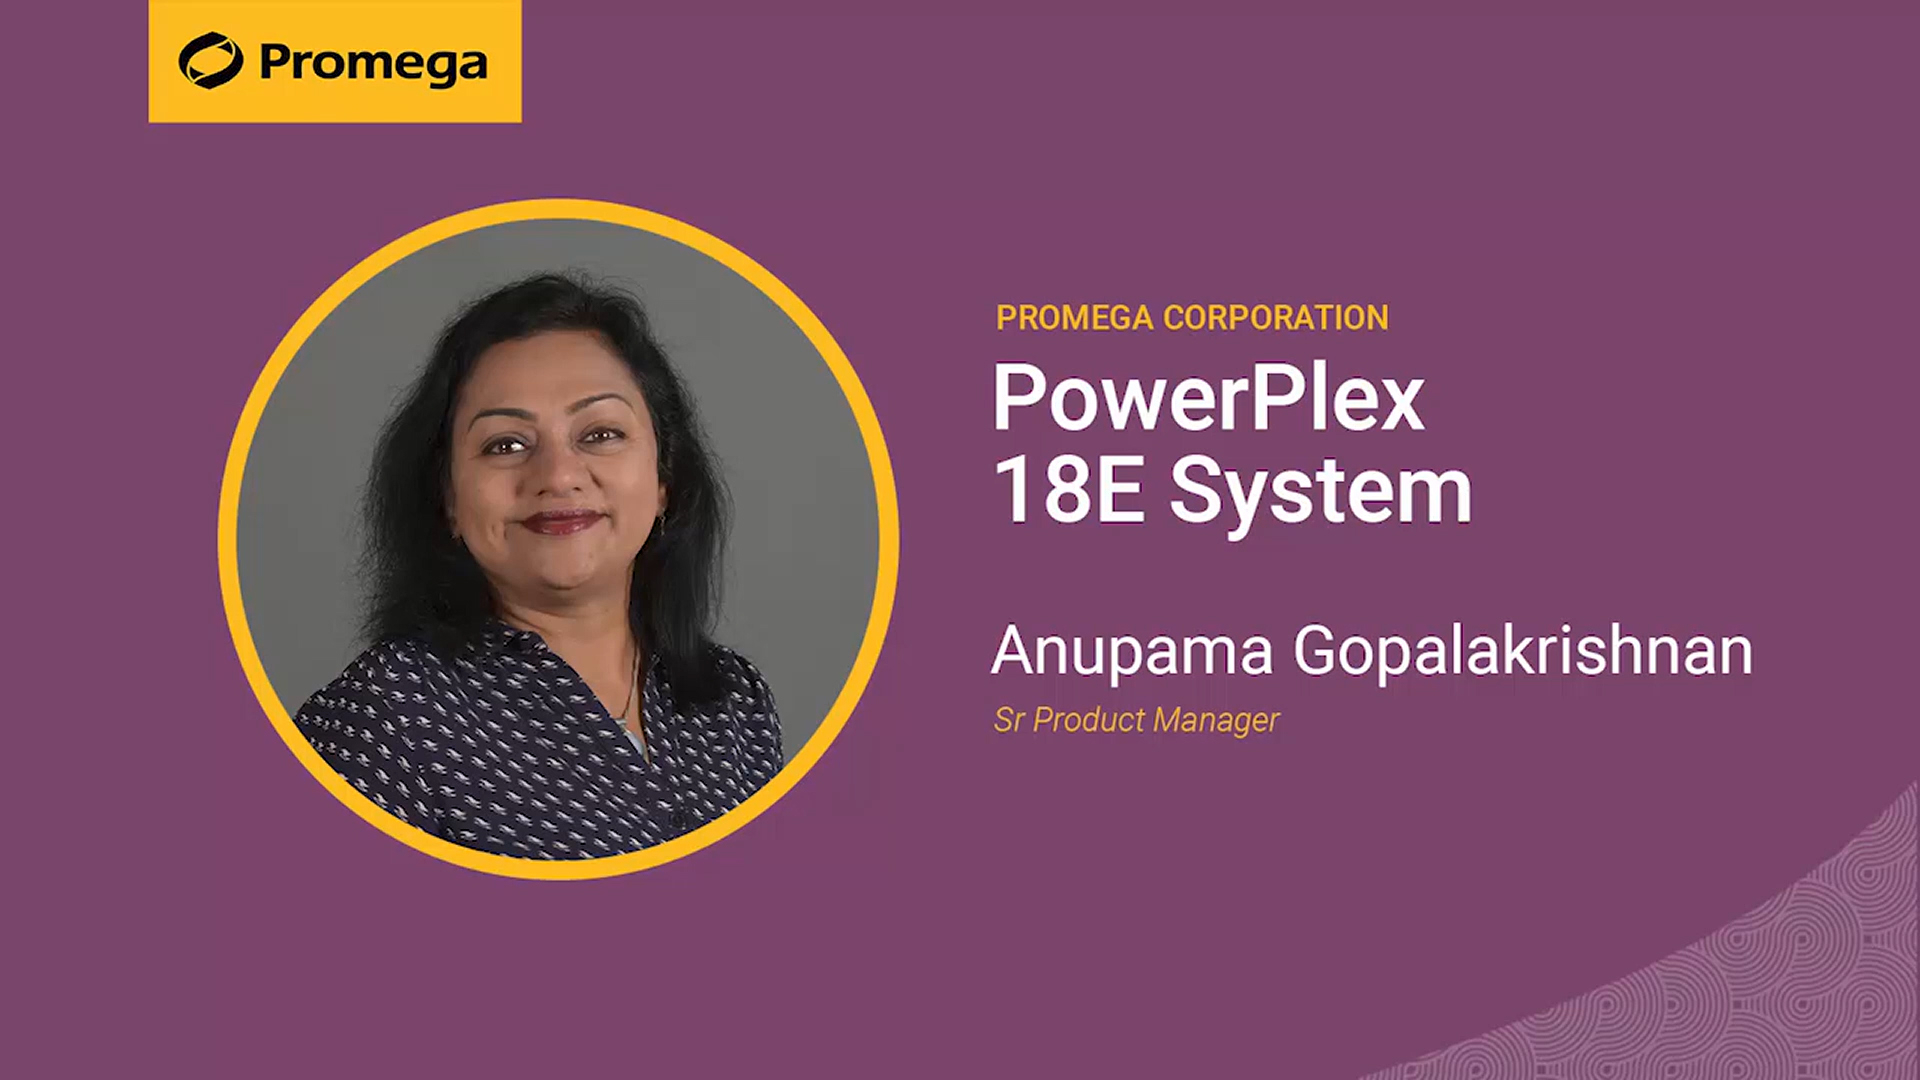 Product Manager Anupama Gopalakrishnan describes how European forensic labs can benefit from using the PowerPlex 18E System, featuring 8-color STR chemistry.